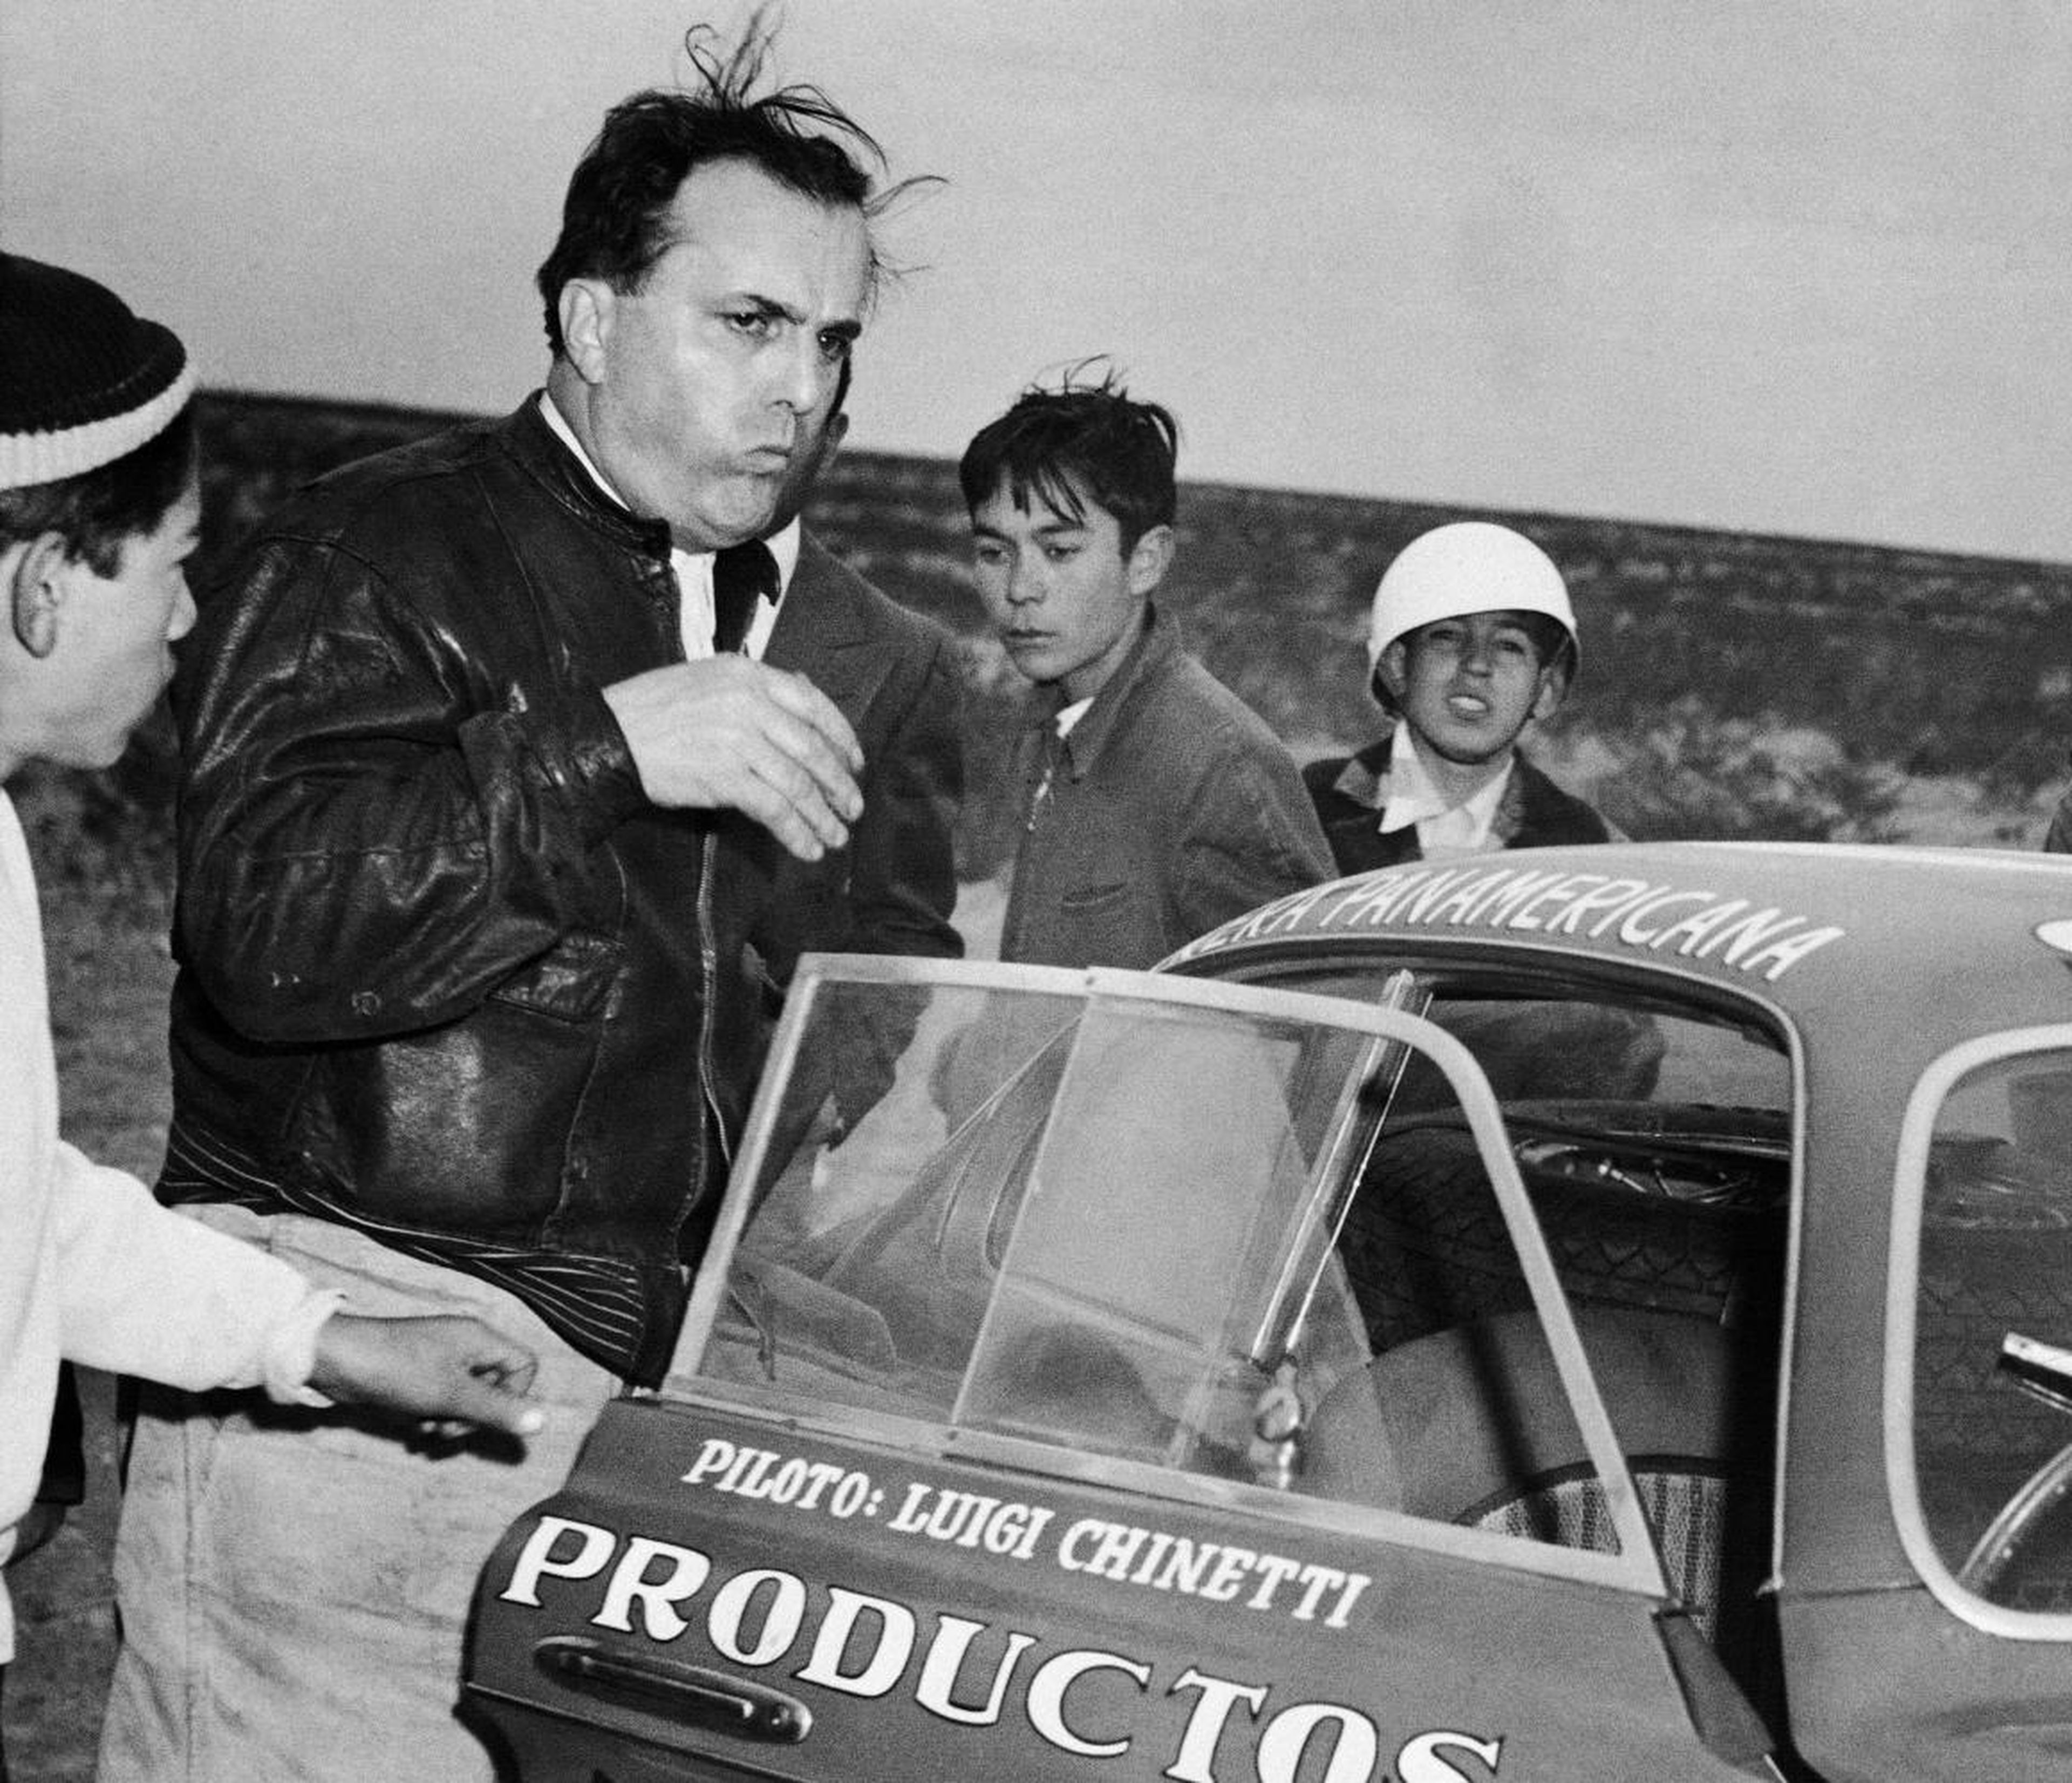 In the late 40s, Luigi Chinetti — a successful Italian-born racing driver and newly naturalized American citizen — approached Ferrari about the prospect of building sports cars for the public.